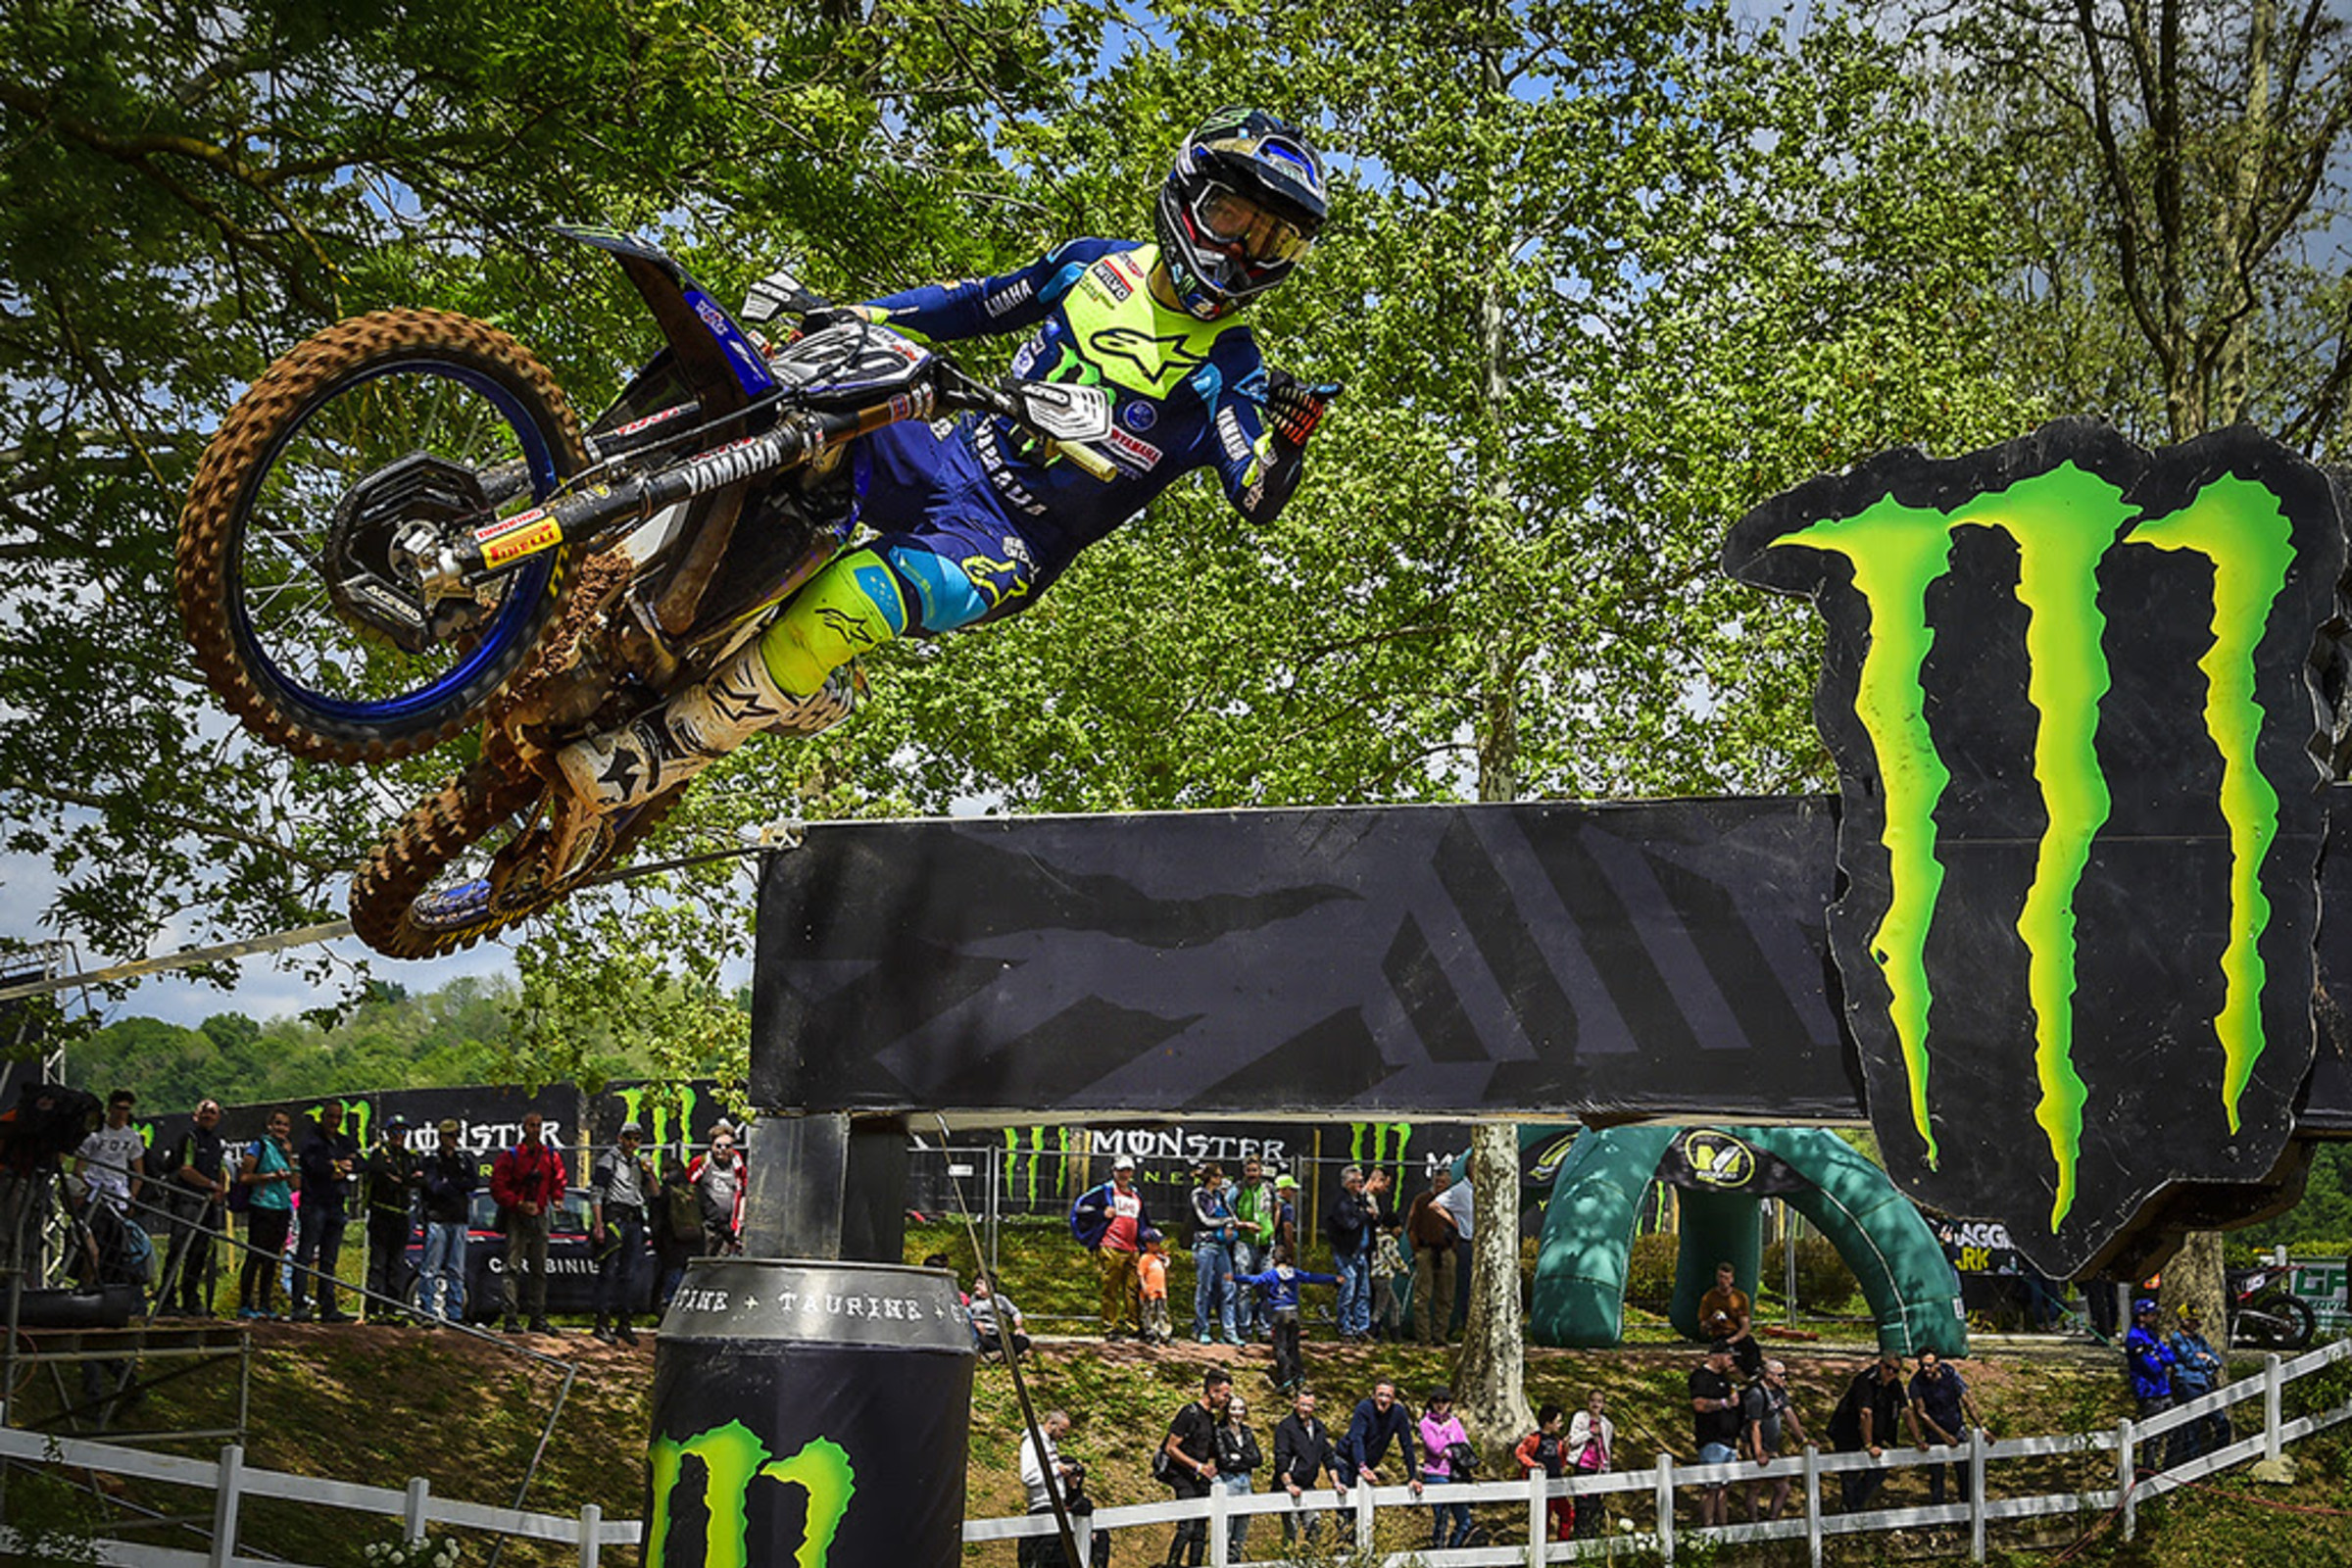 Renaux (MXGP) and Vialle (MX2) Win Qualifying at MXGP of Italy